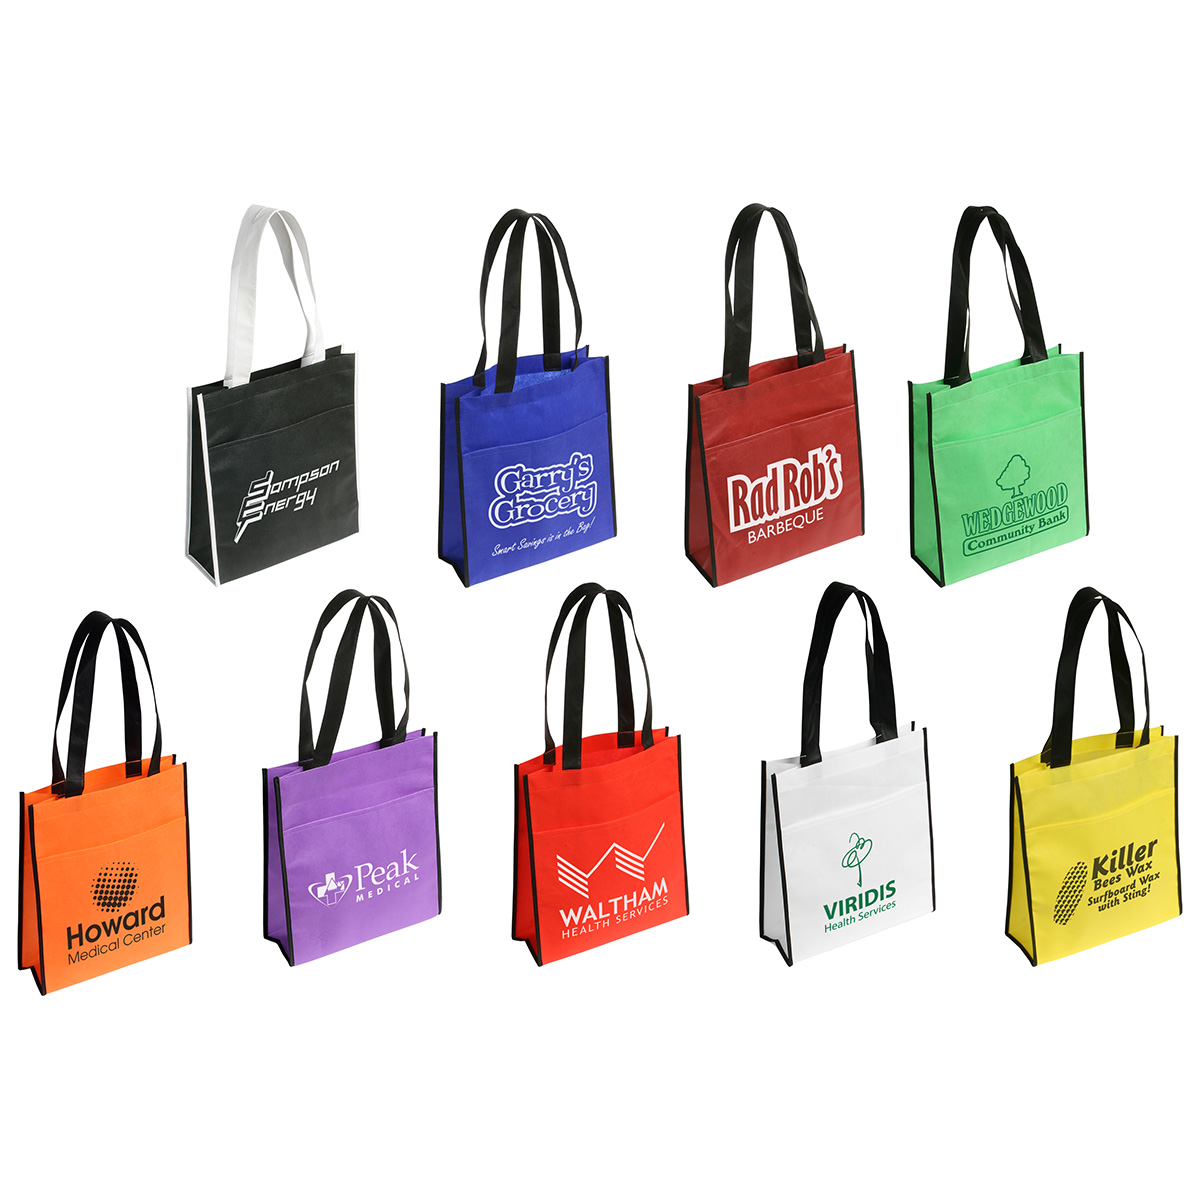 totes and shopping bags as promotional products